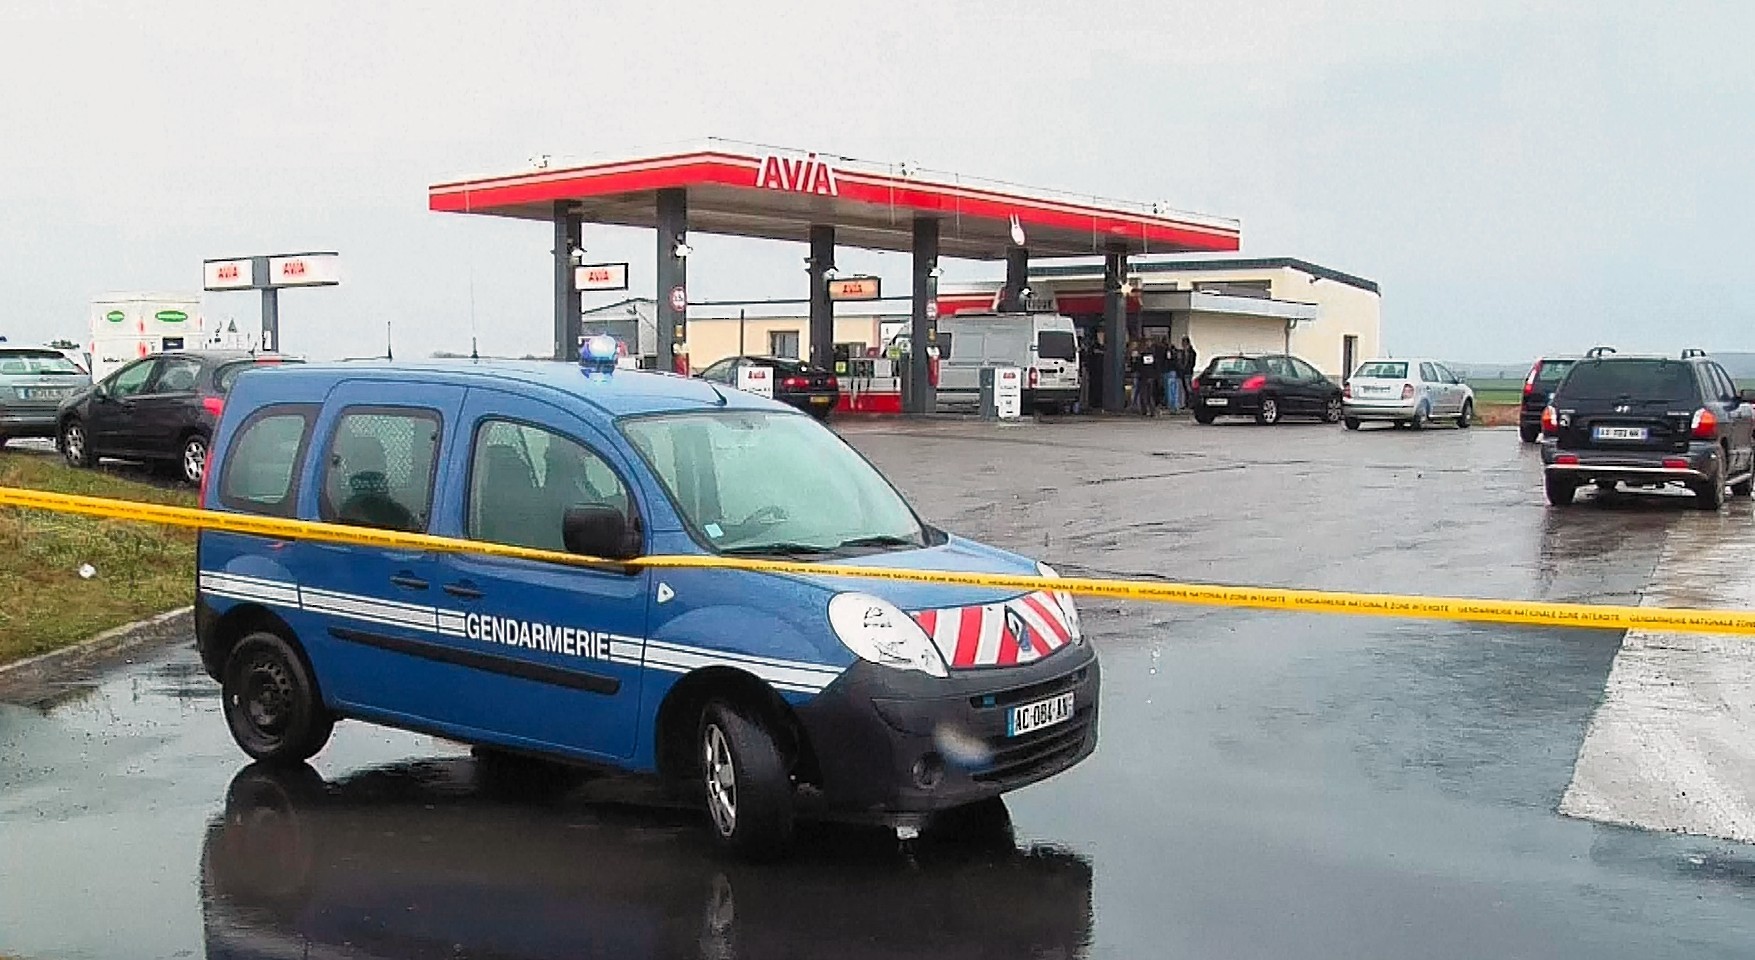 The petrol station in Villers Cotterets, 80 kilometres north east of Paris, where the suspects were reportedly spotted (AP)